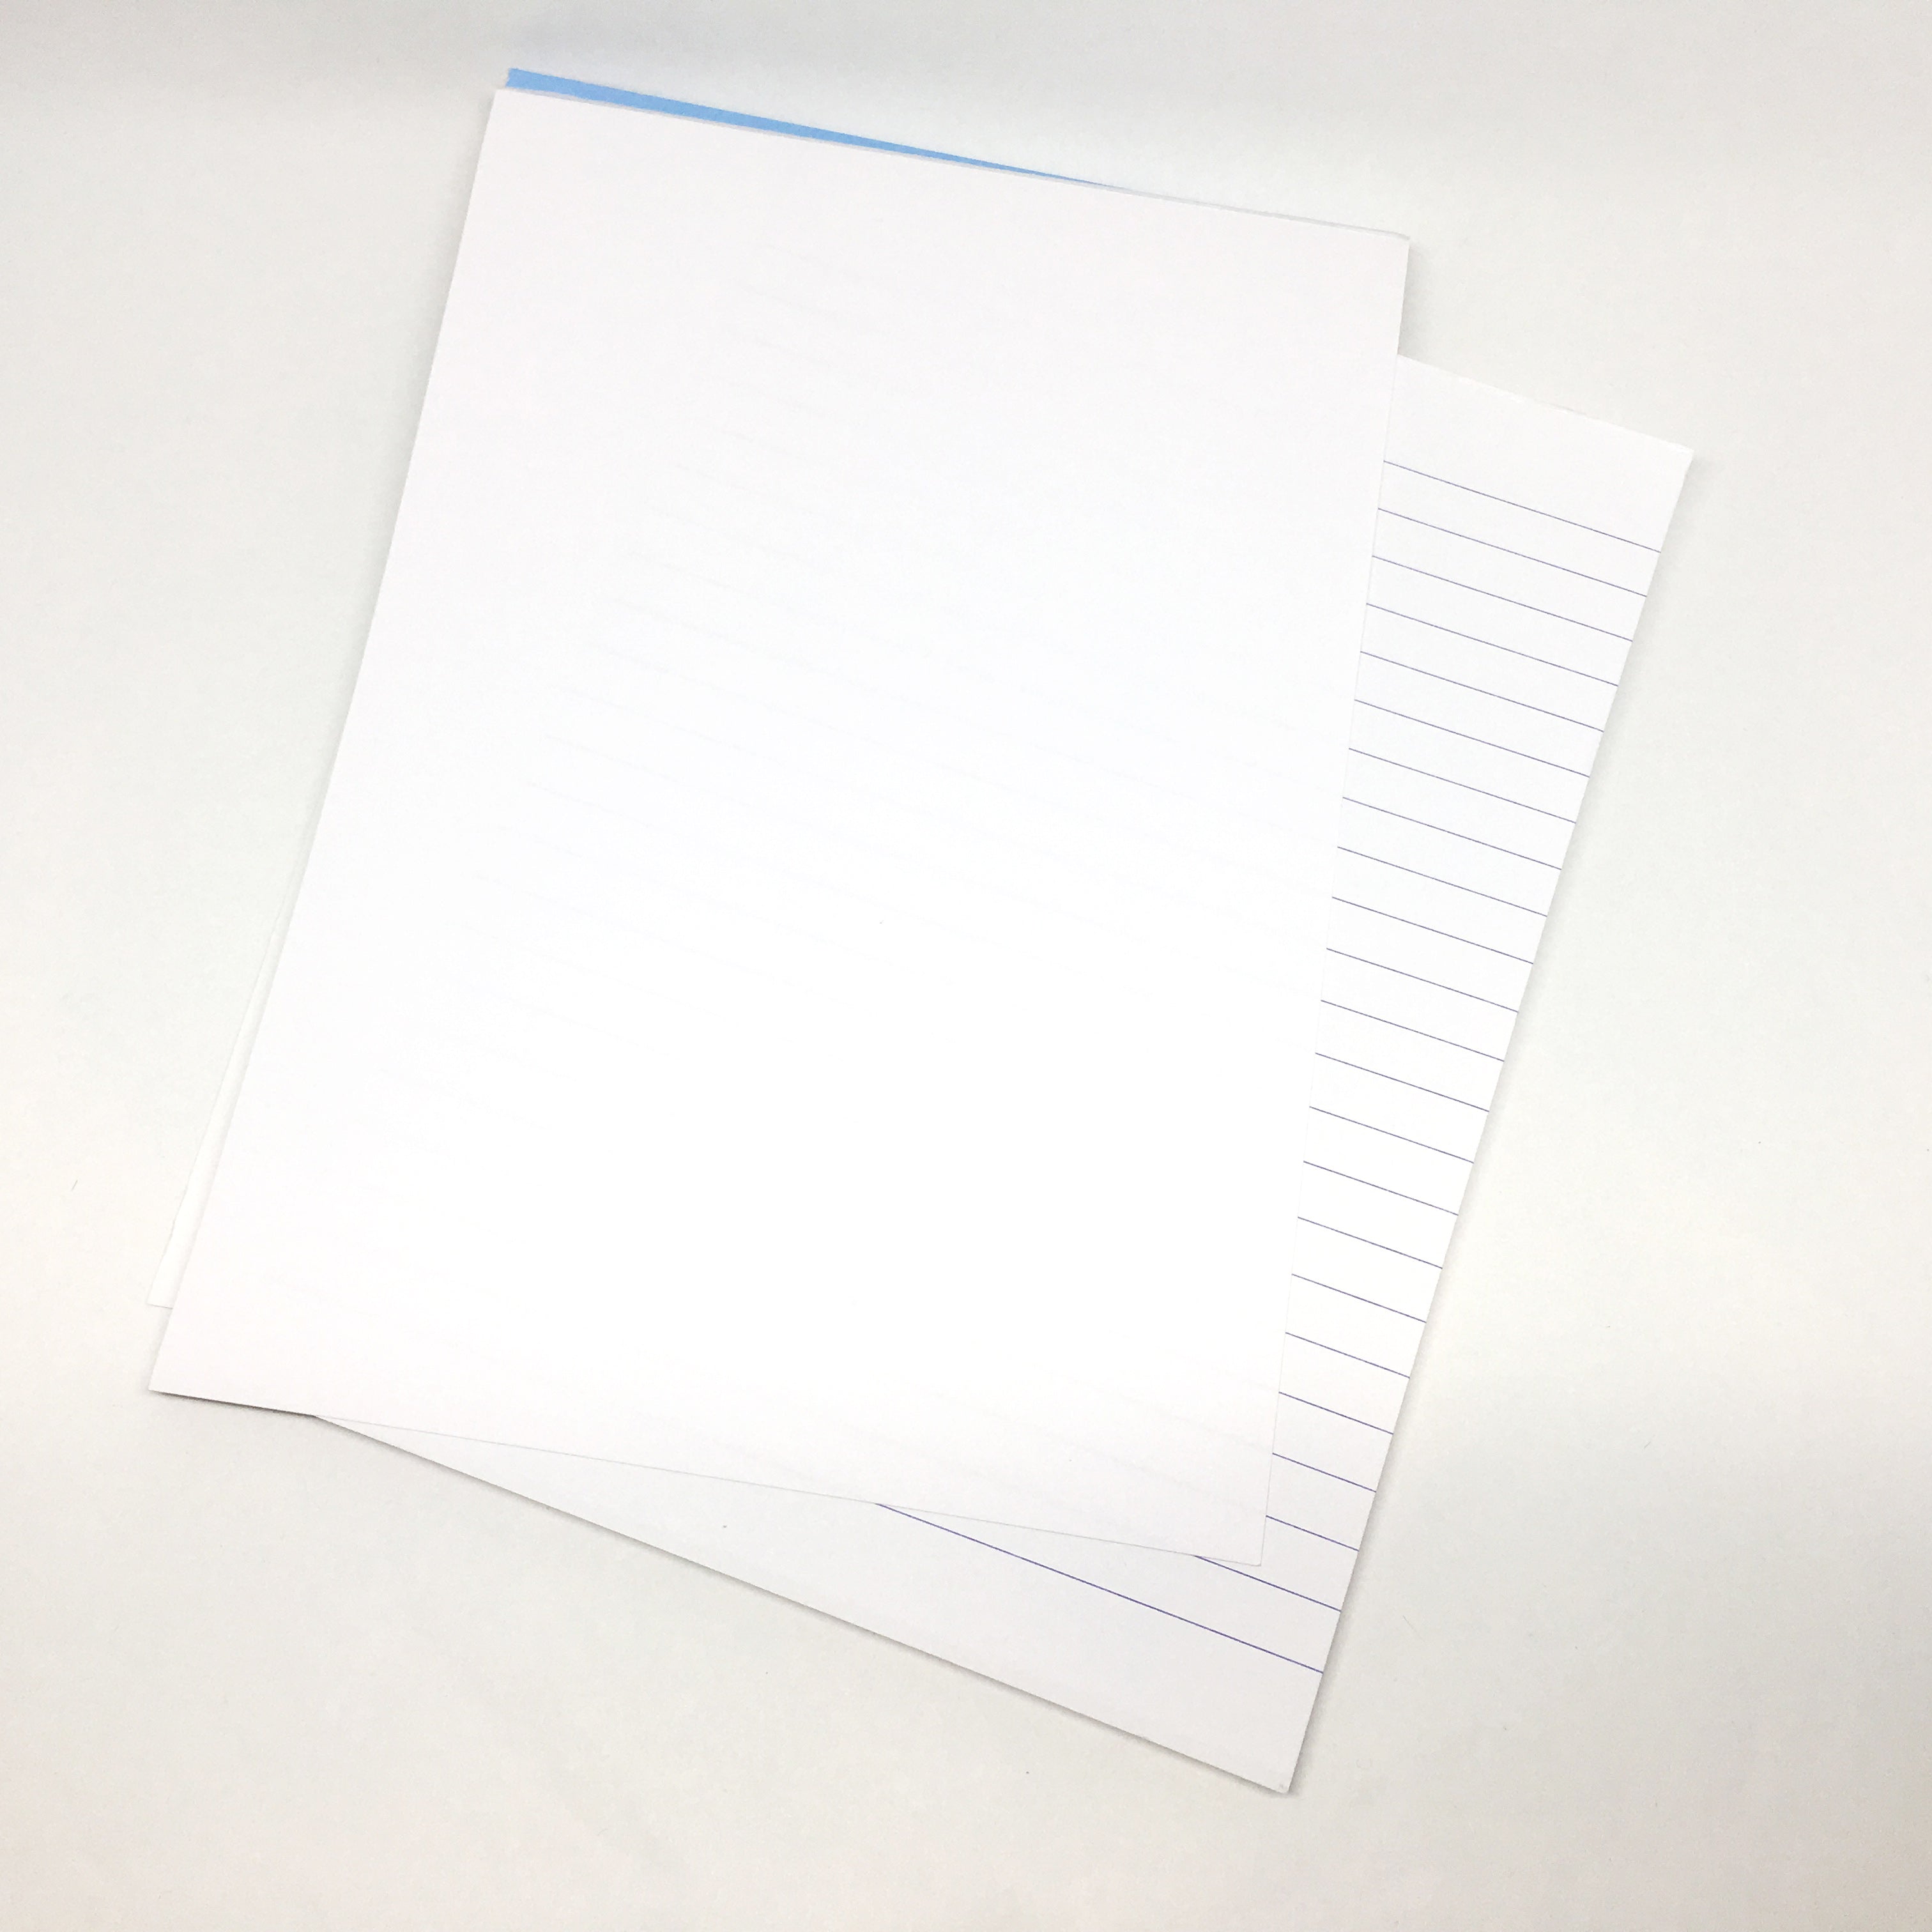 Clairefontaine Triomphe Stationery Pad A5 Size - 50 Sheets